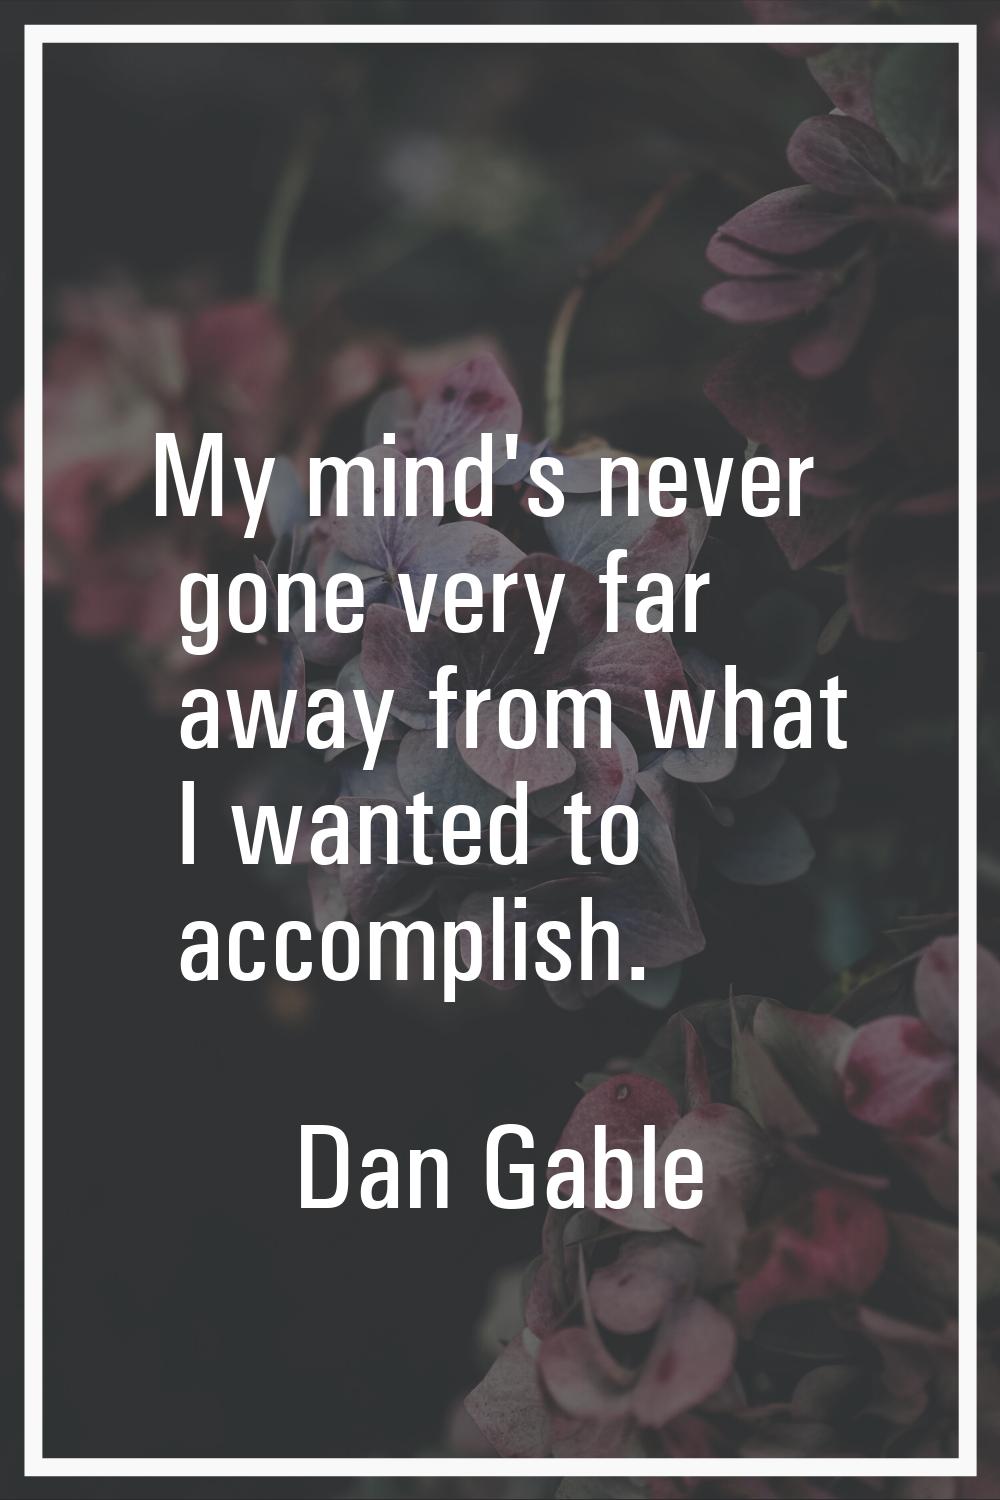 My mind's never gone very far away from what I wanted to accomplish.